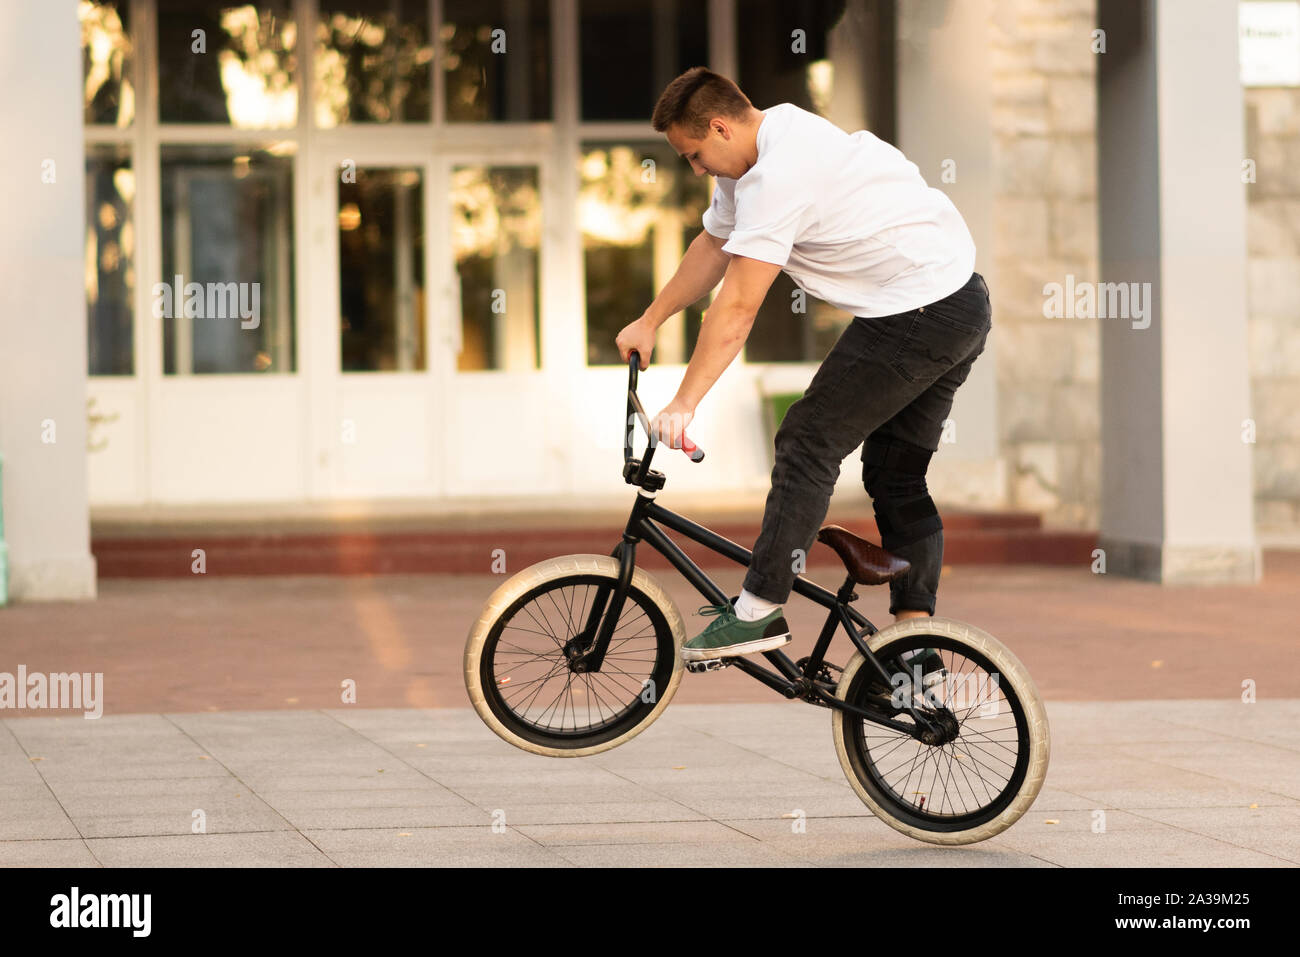 The guy rides on the BMX, standing on the rear wheel. Stock Photo